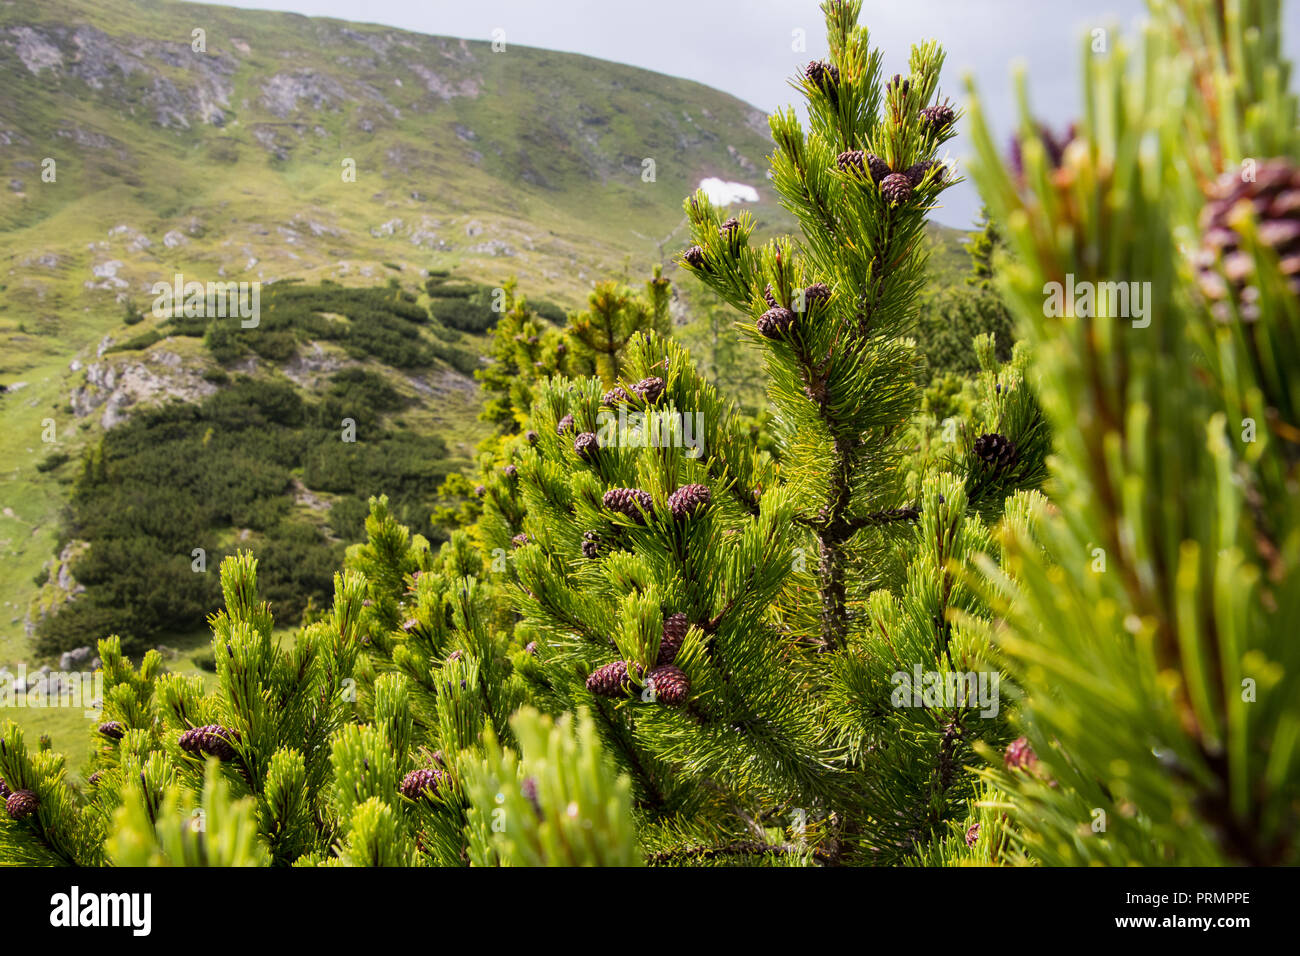 Cones on a young pine at a high alpine meadow Stock Photo